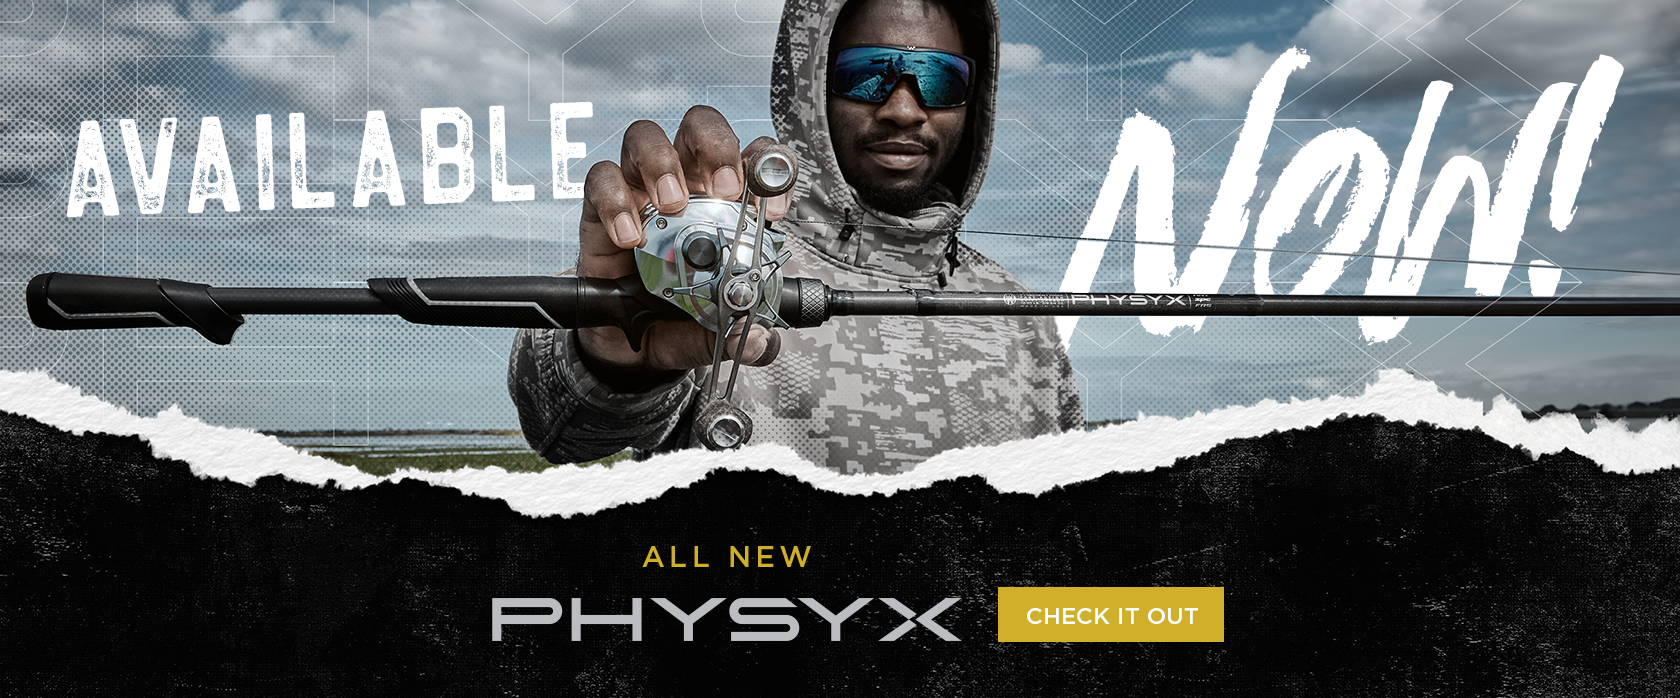 St. Croix Physyx Spinning Rods - American Legacy Fishing, G Loomis